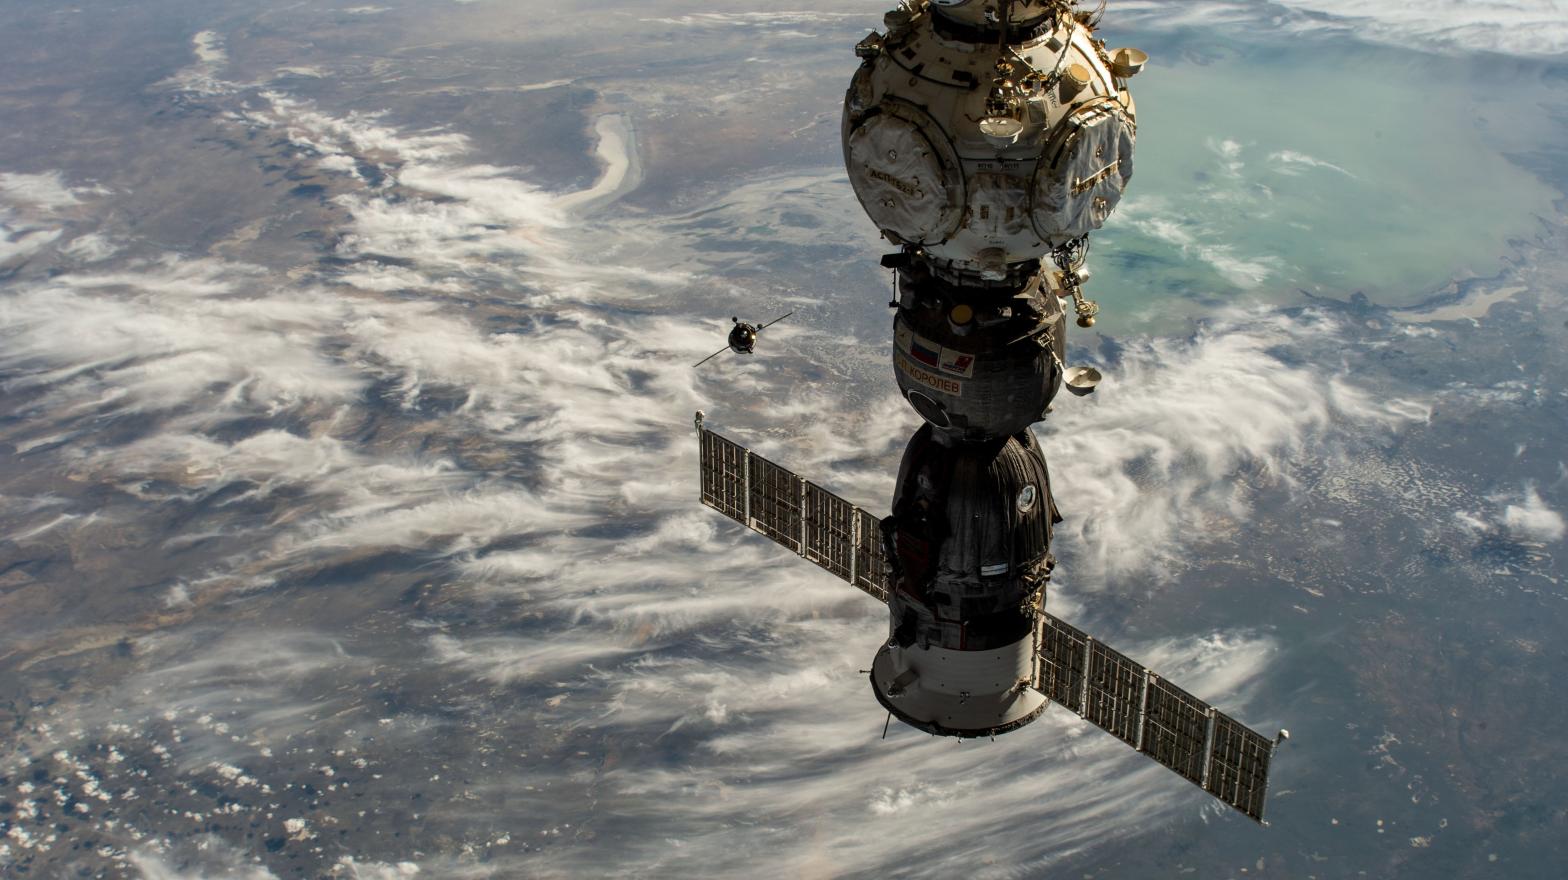 The International Space Station offers a view of Earth like no other. (Image: NASA)